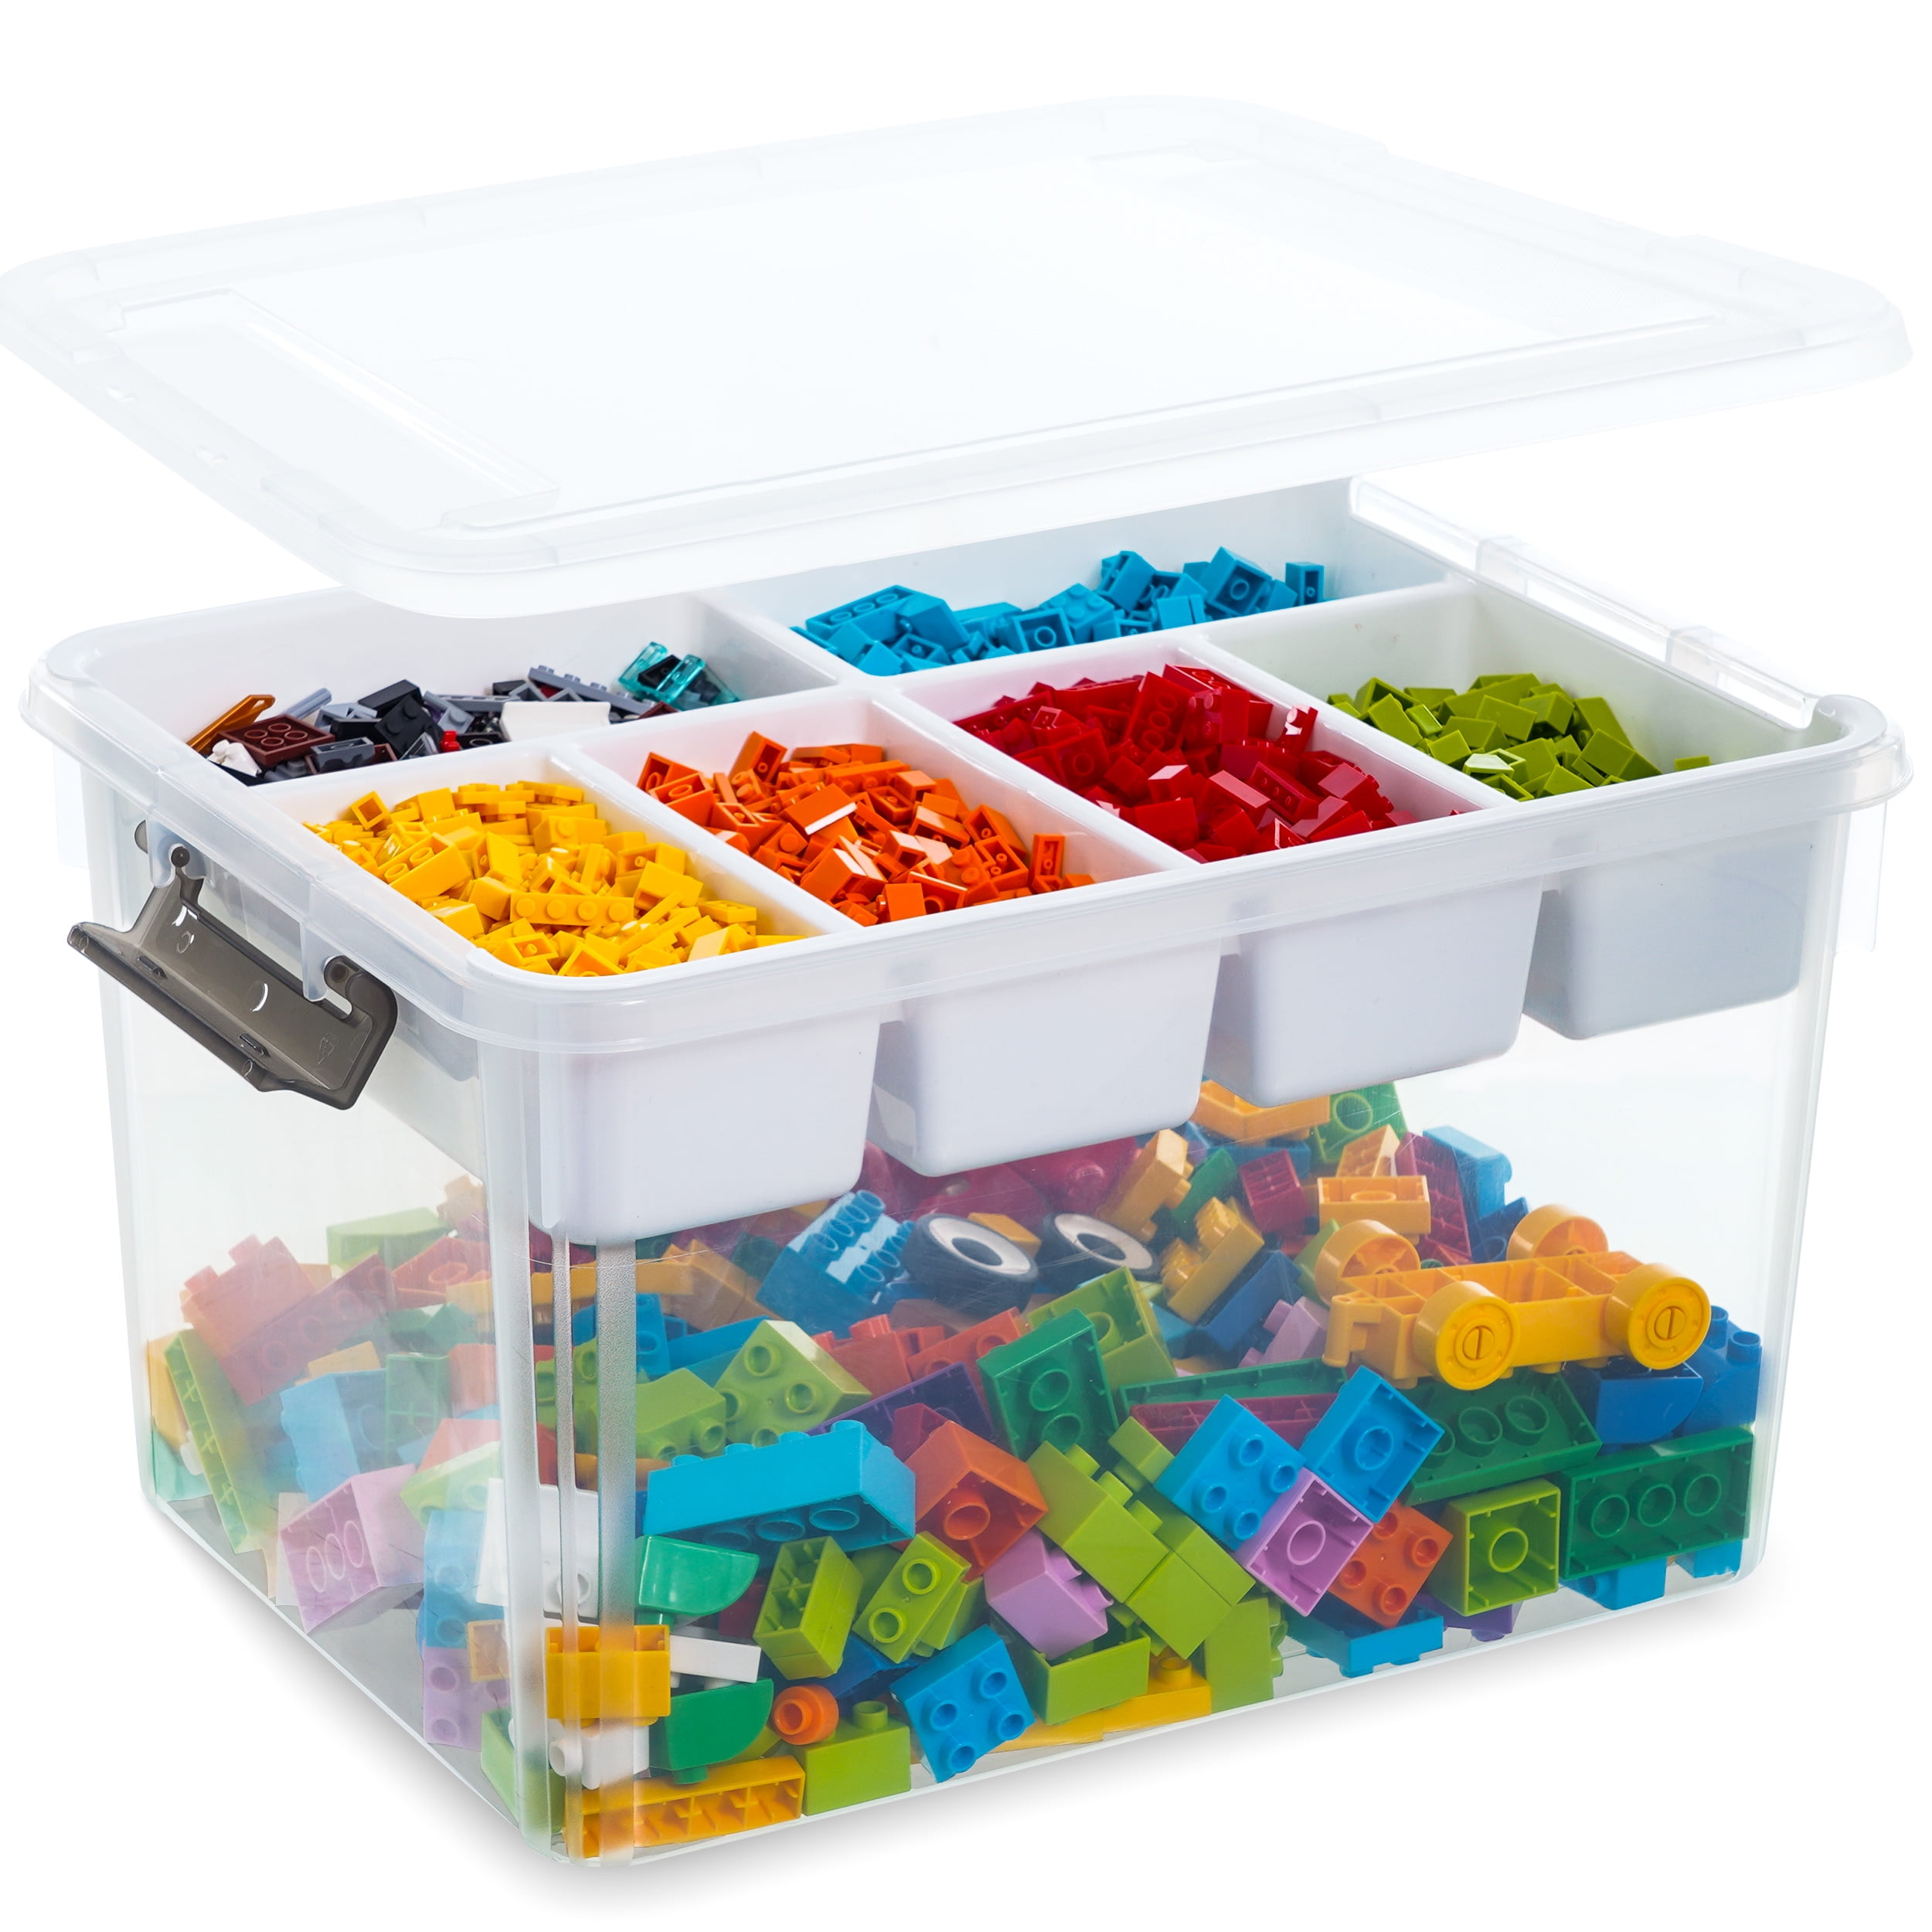  Citylife 20 Packs Plastic Bead Organizers 0.18 QT Clear Storage  Containers with Lids for Craft Storage Small Storage Box, 3.7 x 2.8 x 1.8  Inches : Arts, Crafts & Sewing